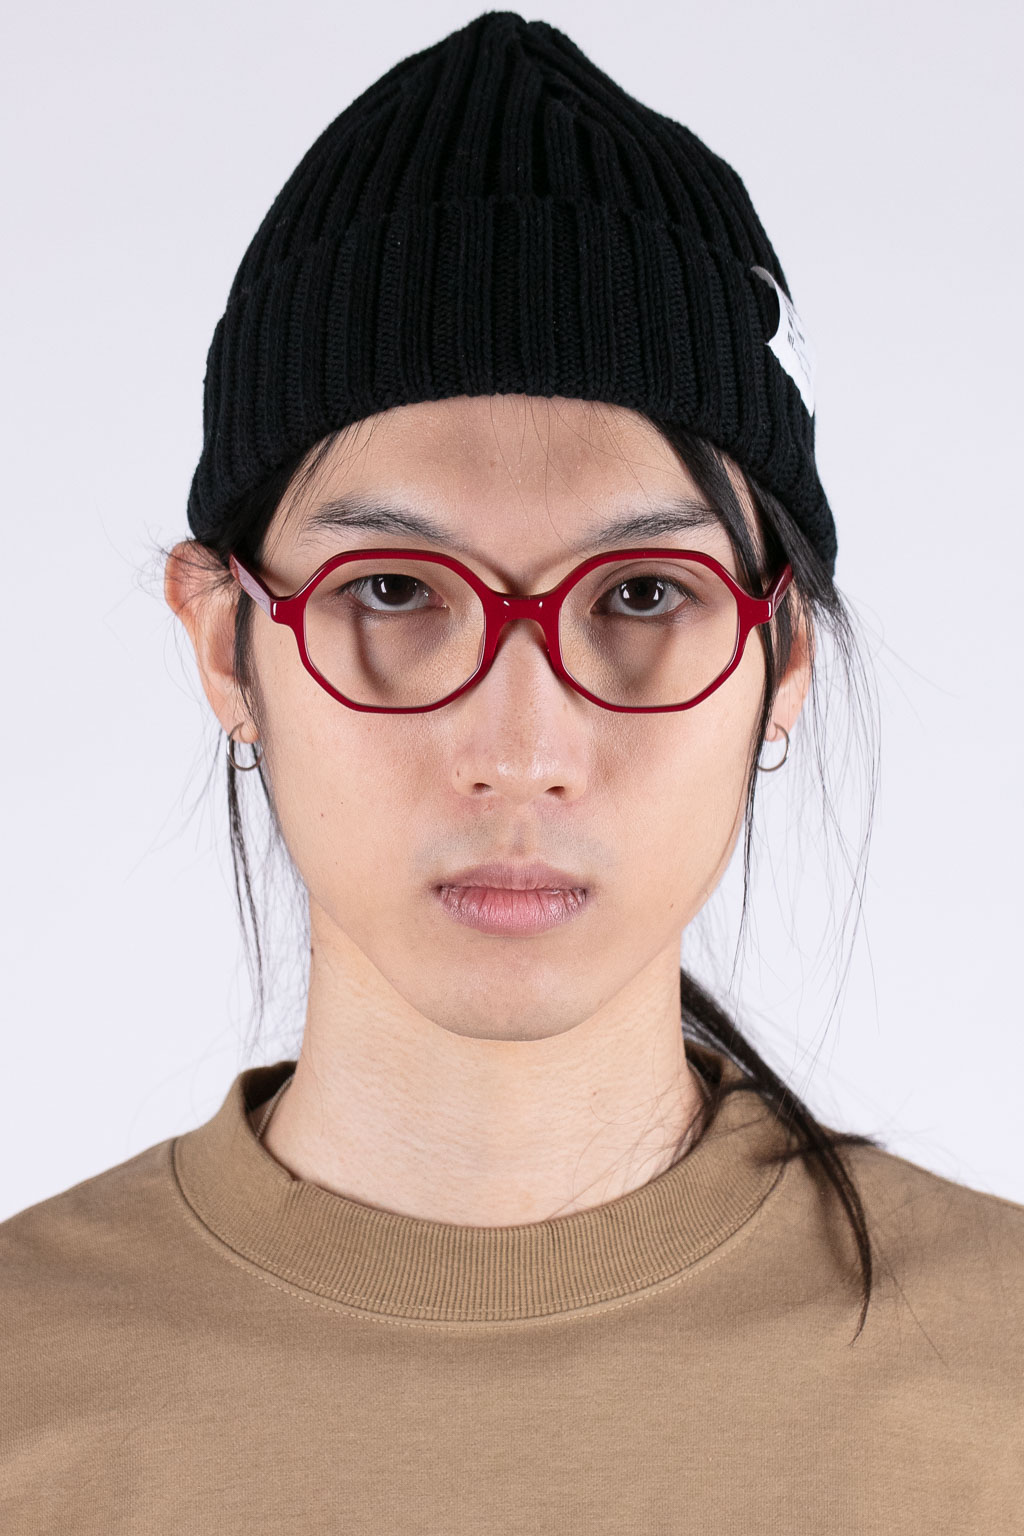 Buddy Optical A Type - Vintage Red